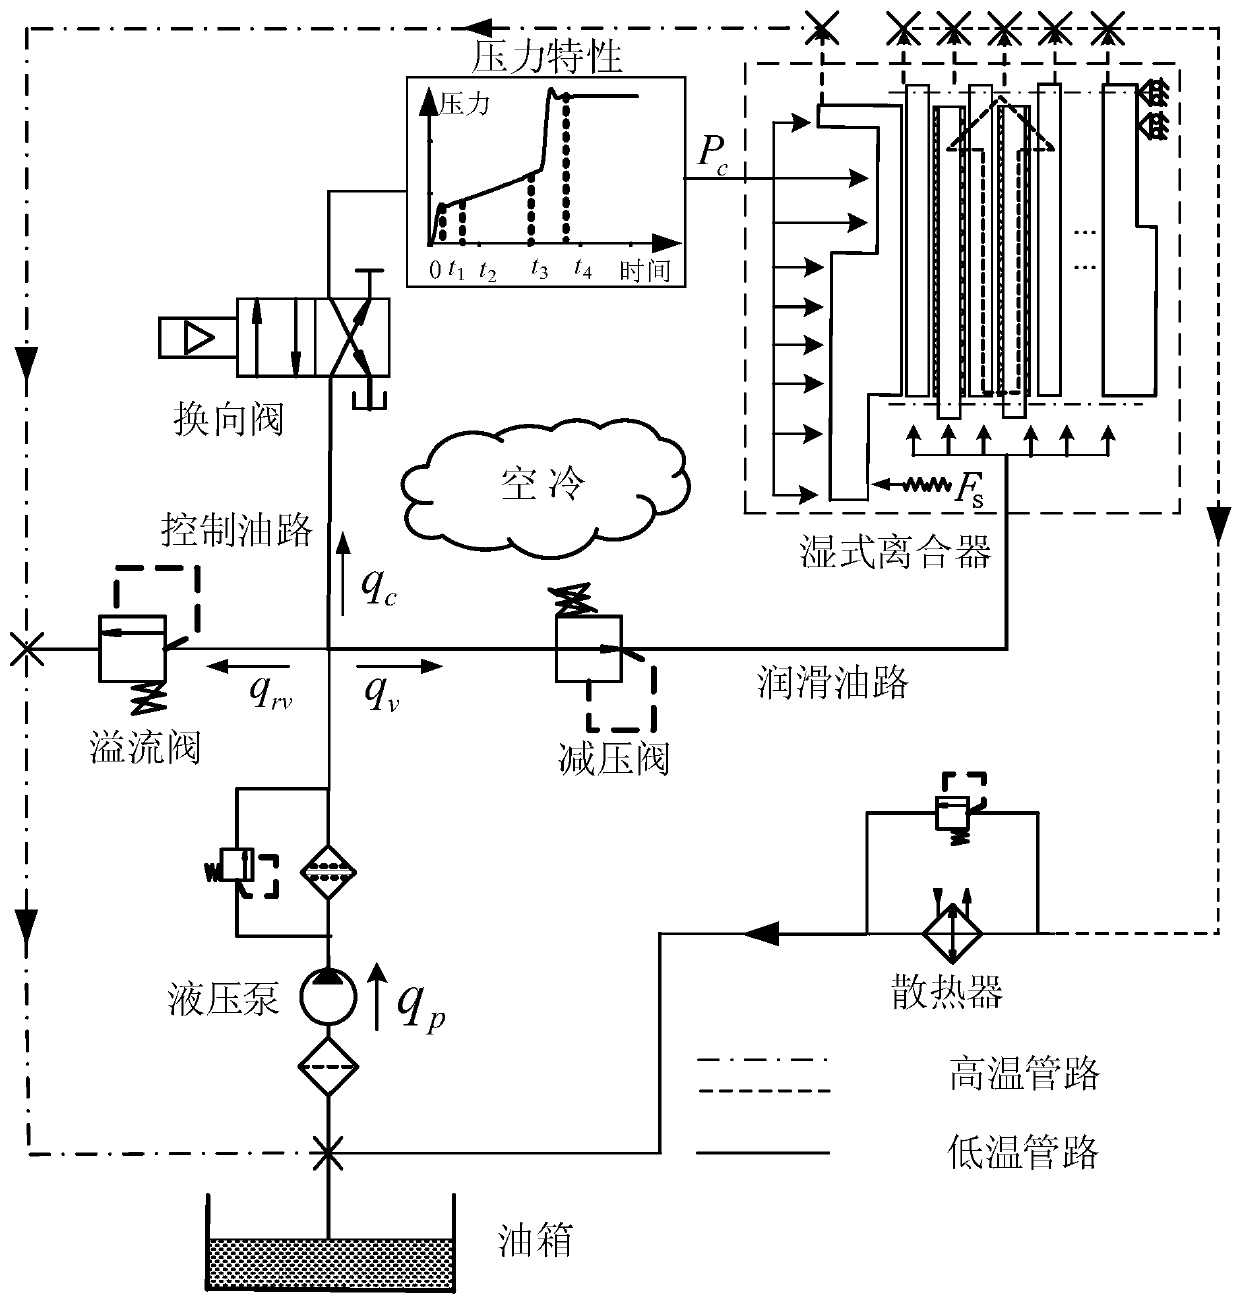 Wet clutch hydraulic system thermal resistance network model and average temperature estimation method